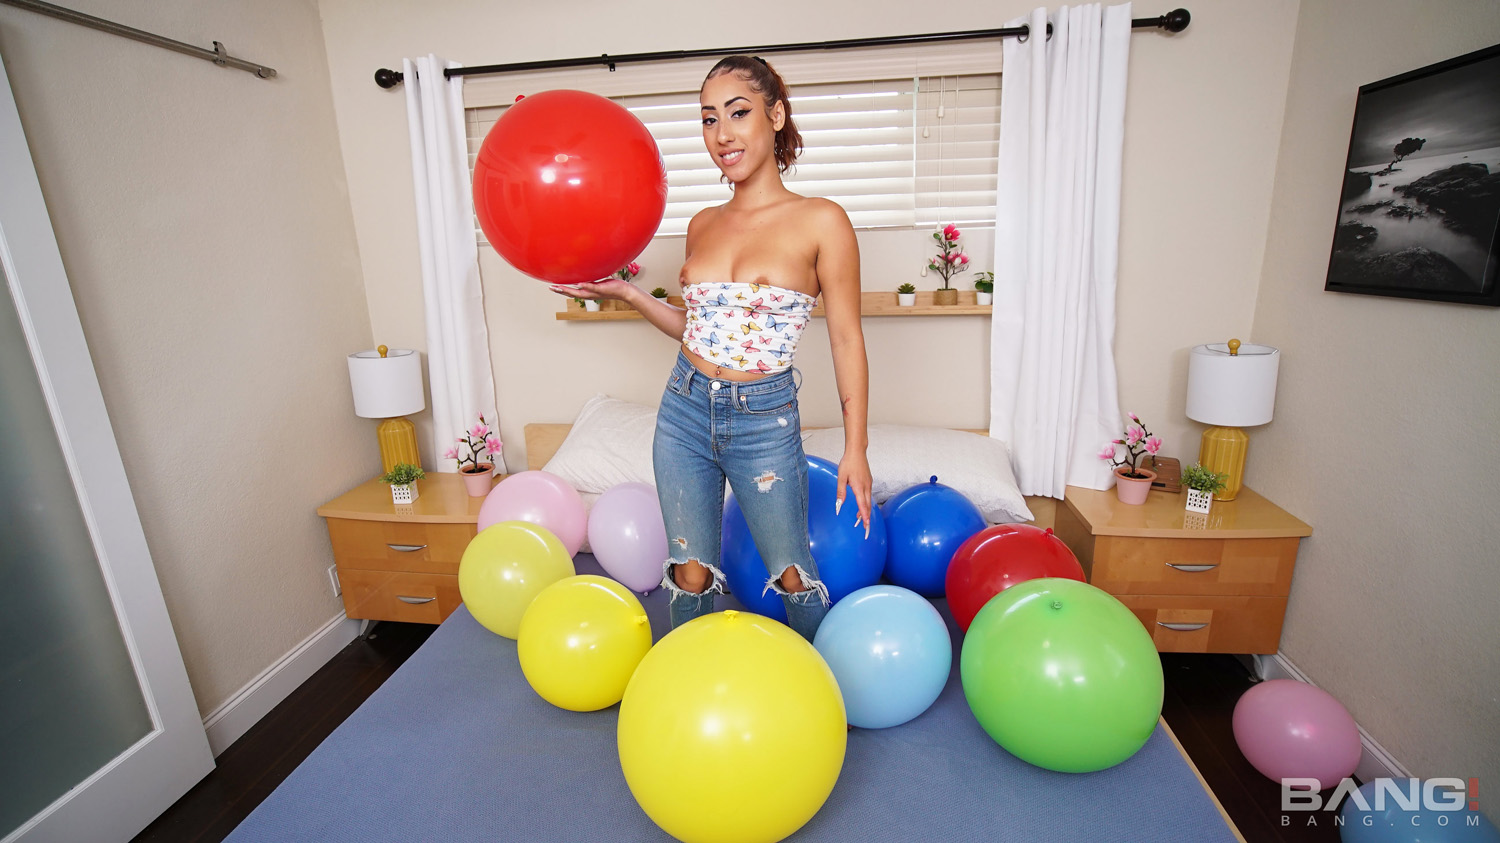 Kira Perez bangs her lover in the middle of inflated balloons